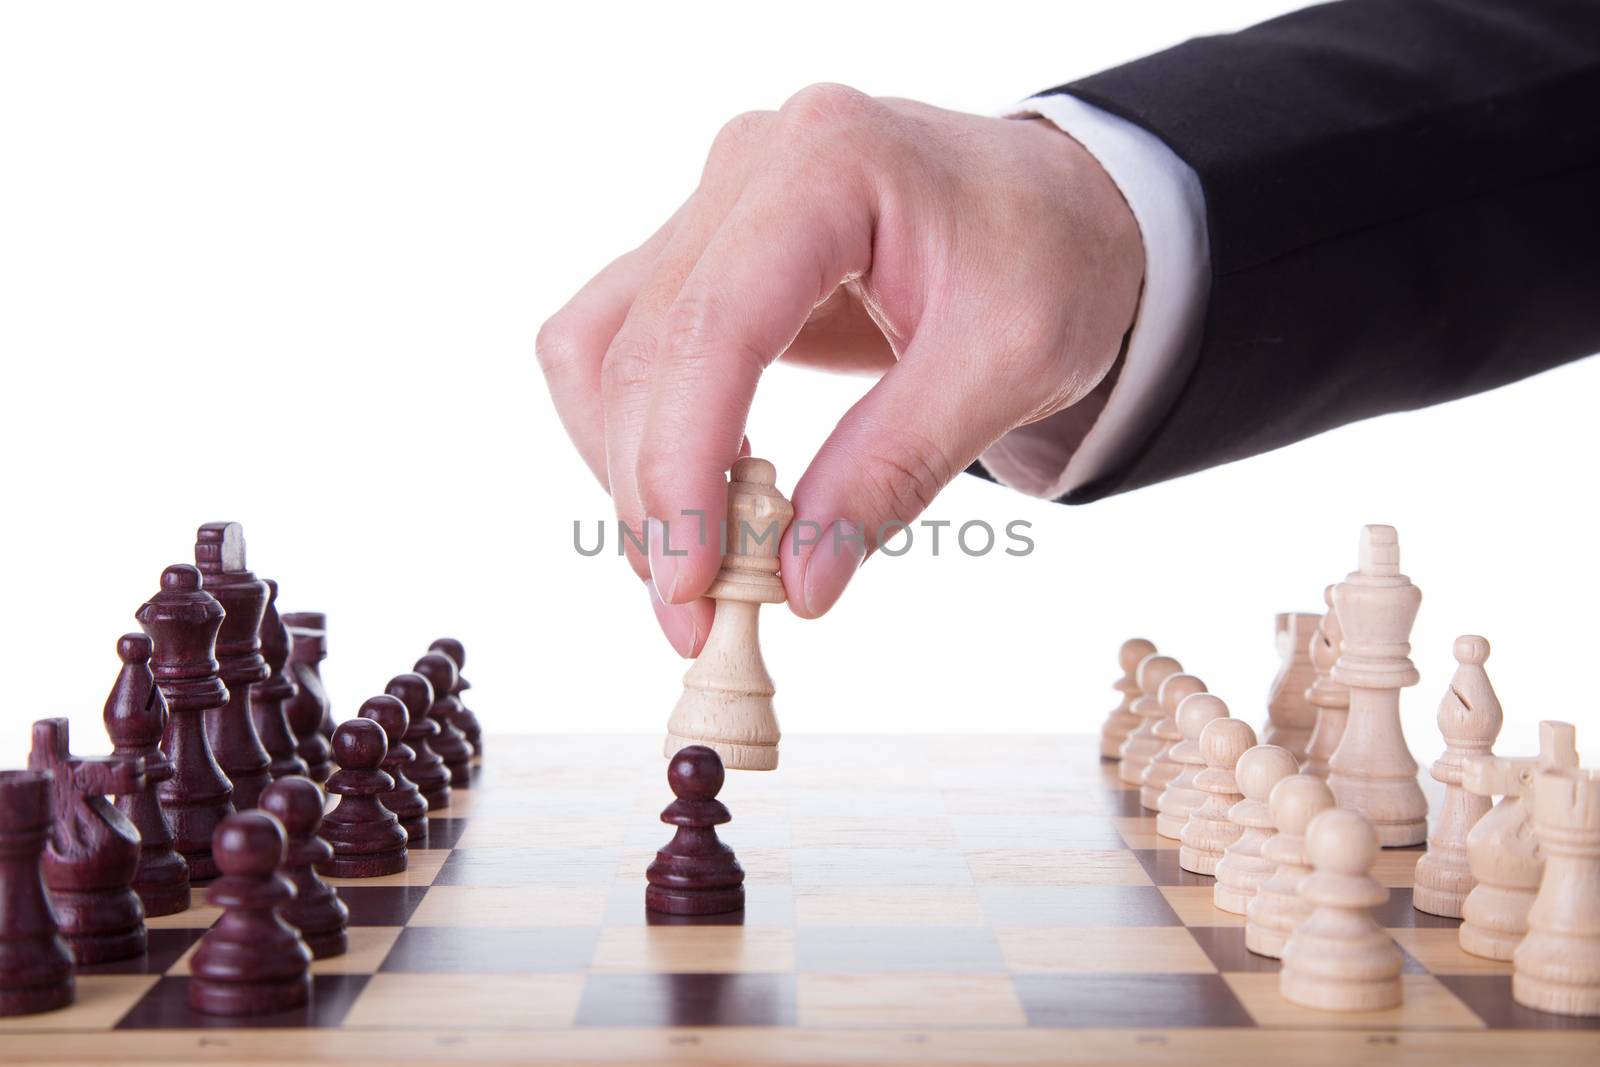 chess pieces on the board during the game